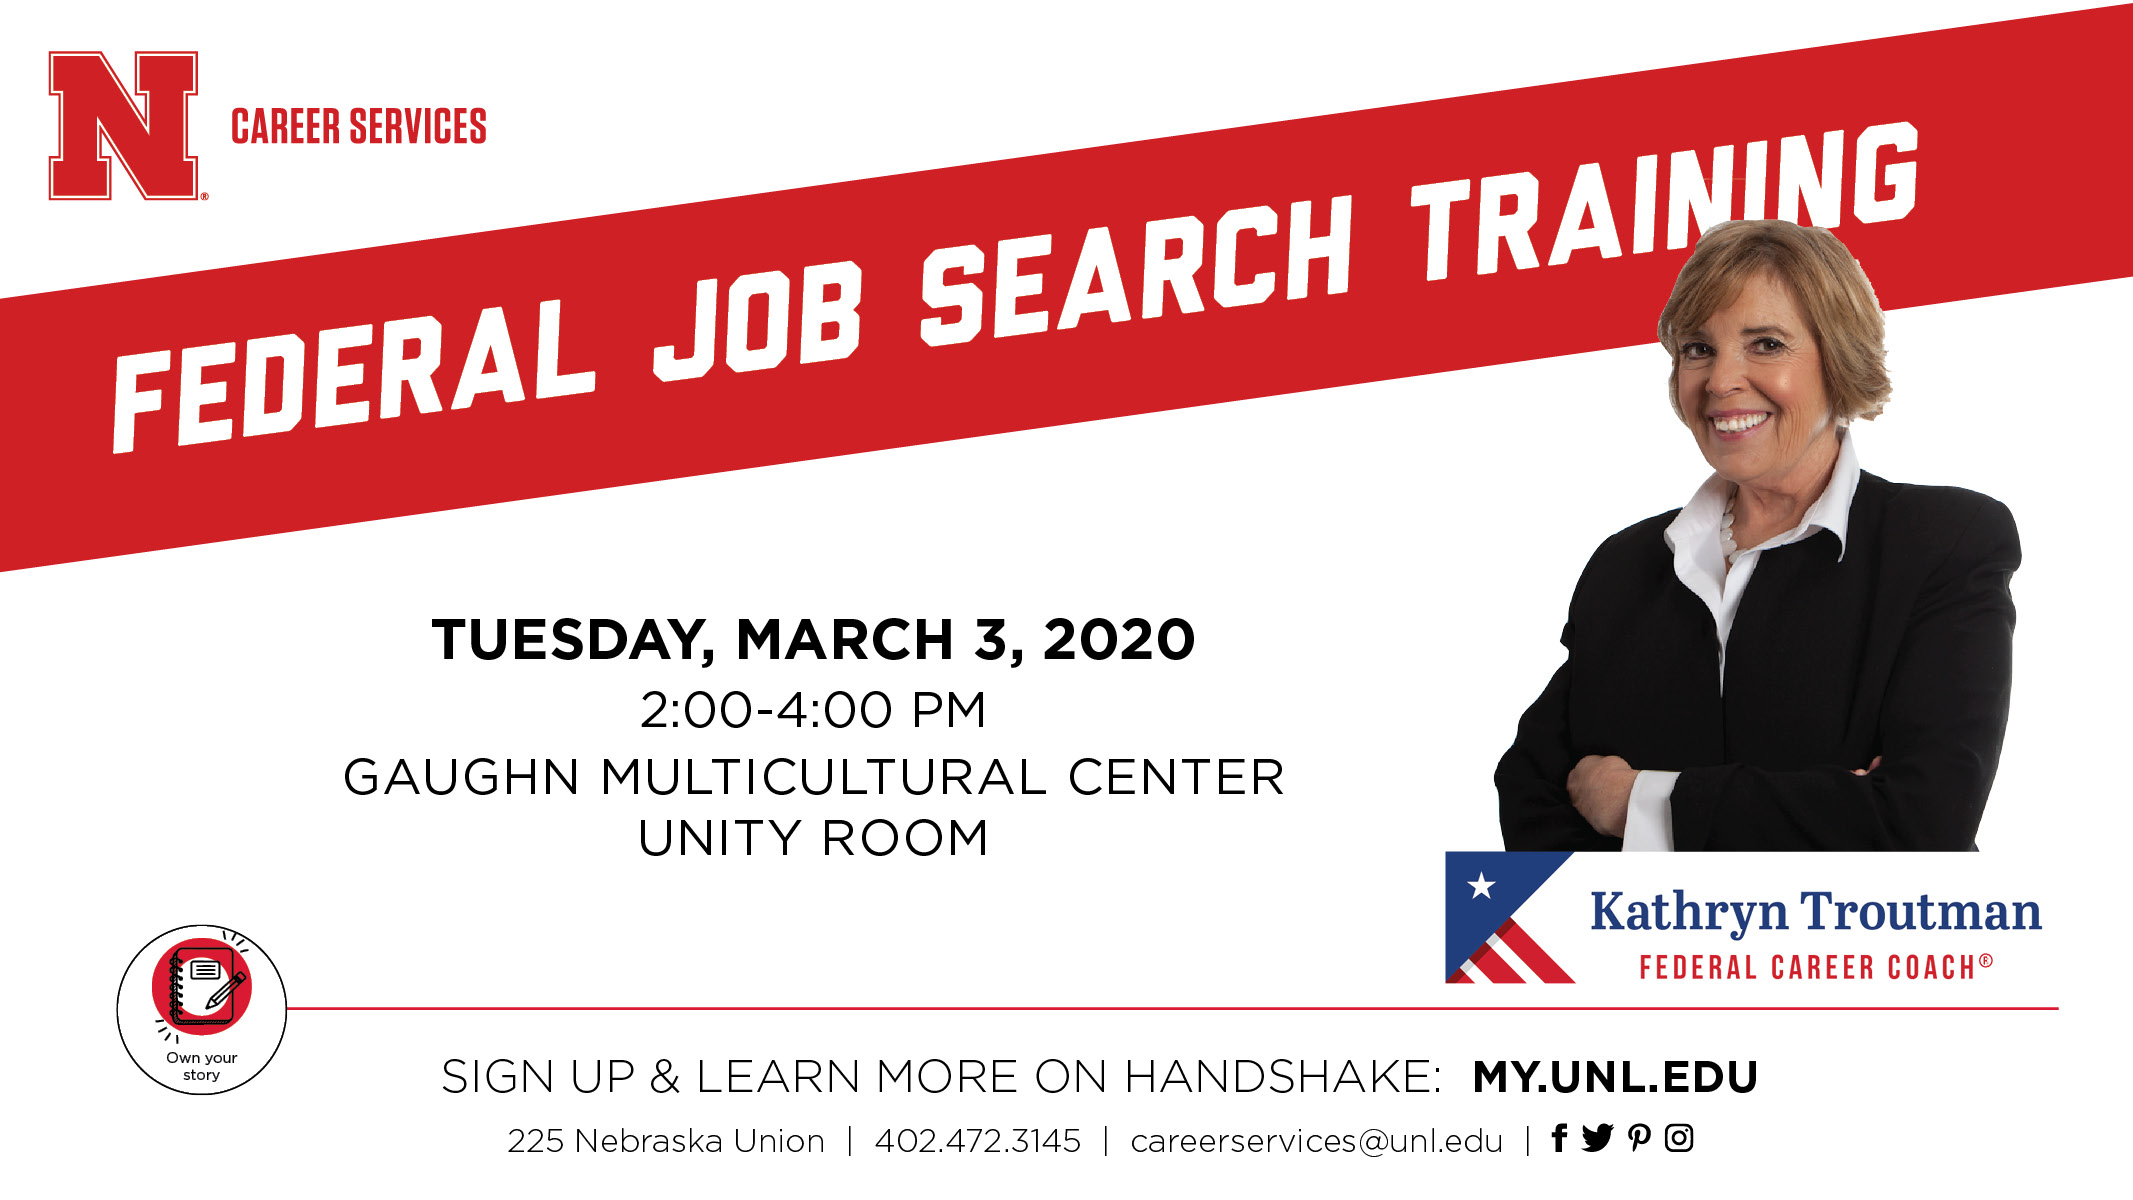 Both students, staff and faculty are encouraged to attend and will learn several strategies on how to better position qualifications on federal job search resume. 